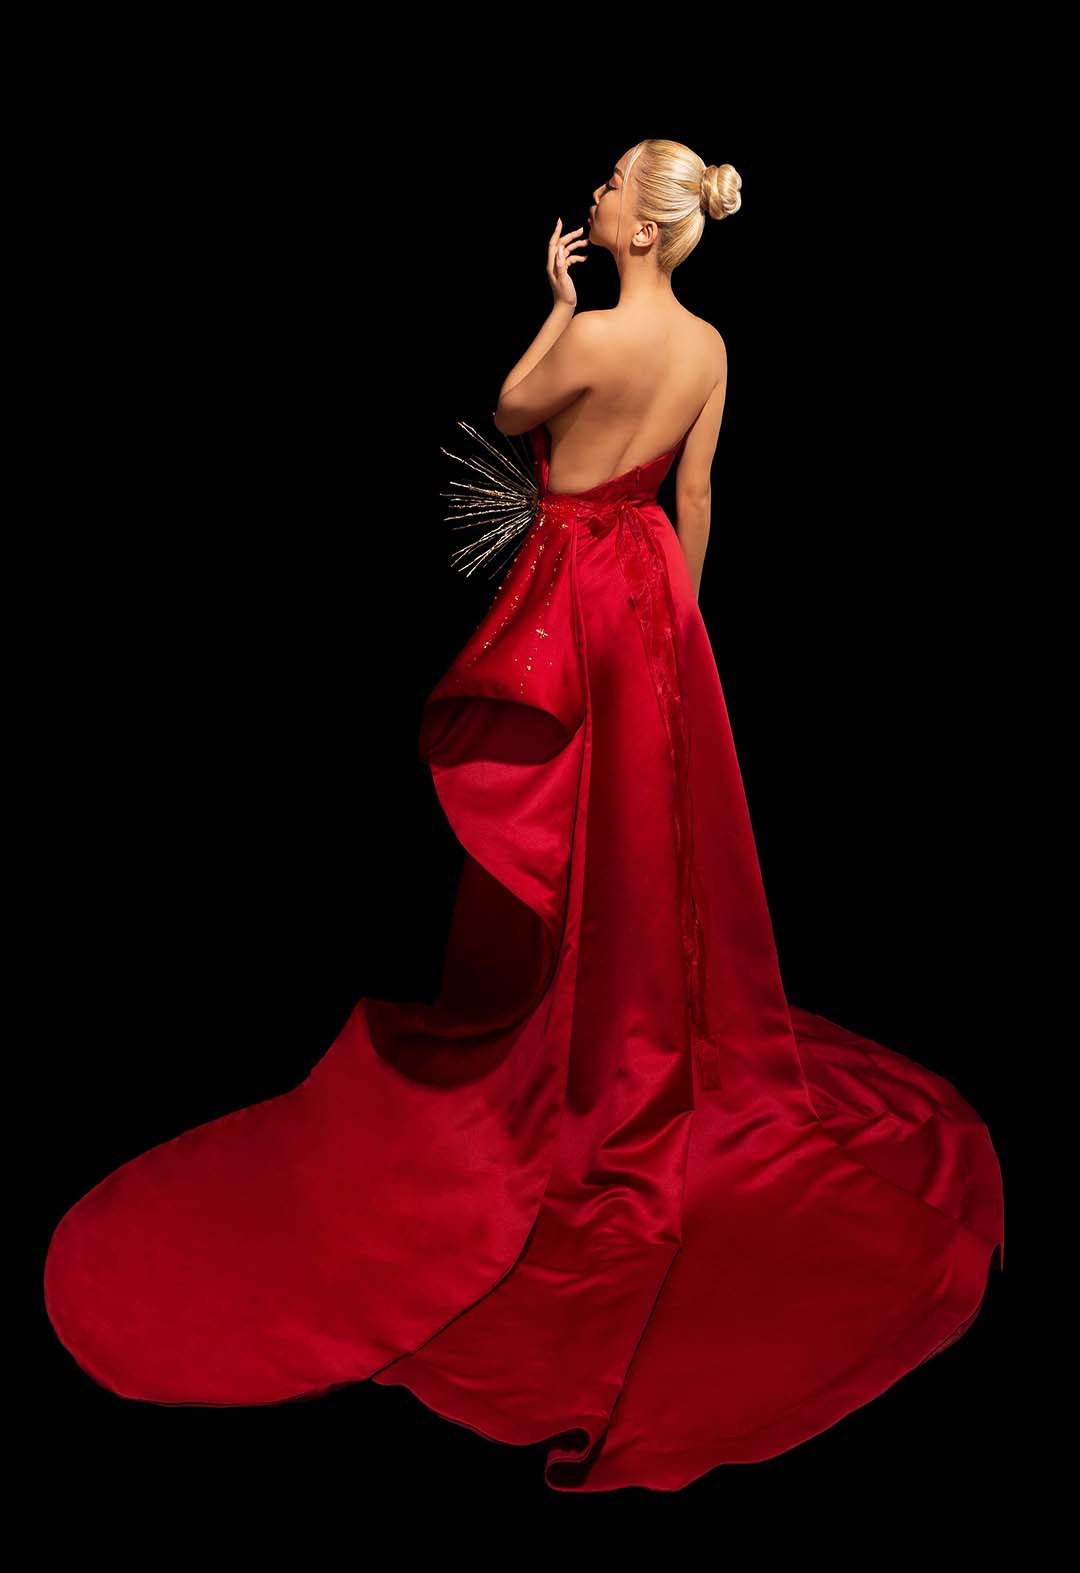 Asymmetrical backless gown with side drape and train